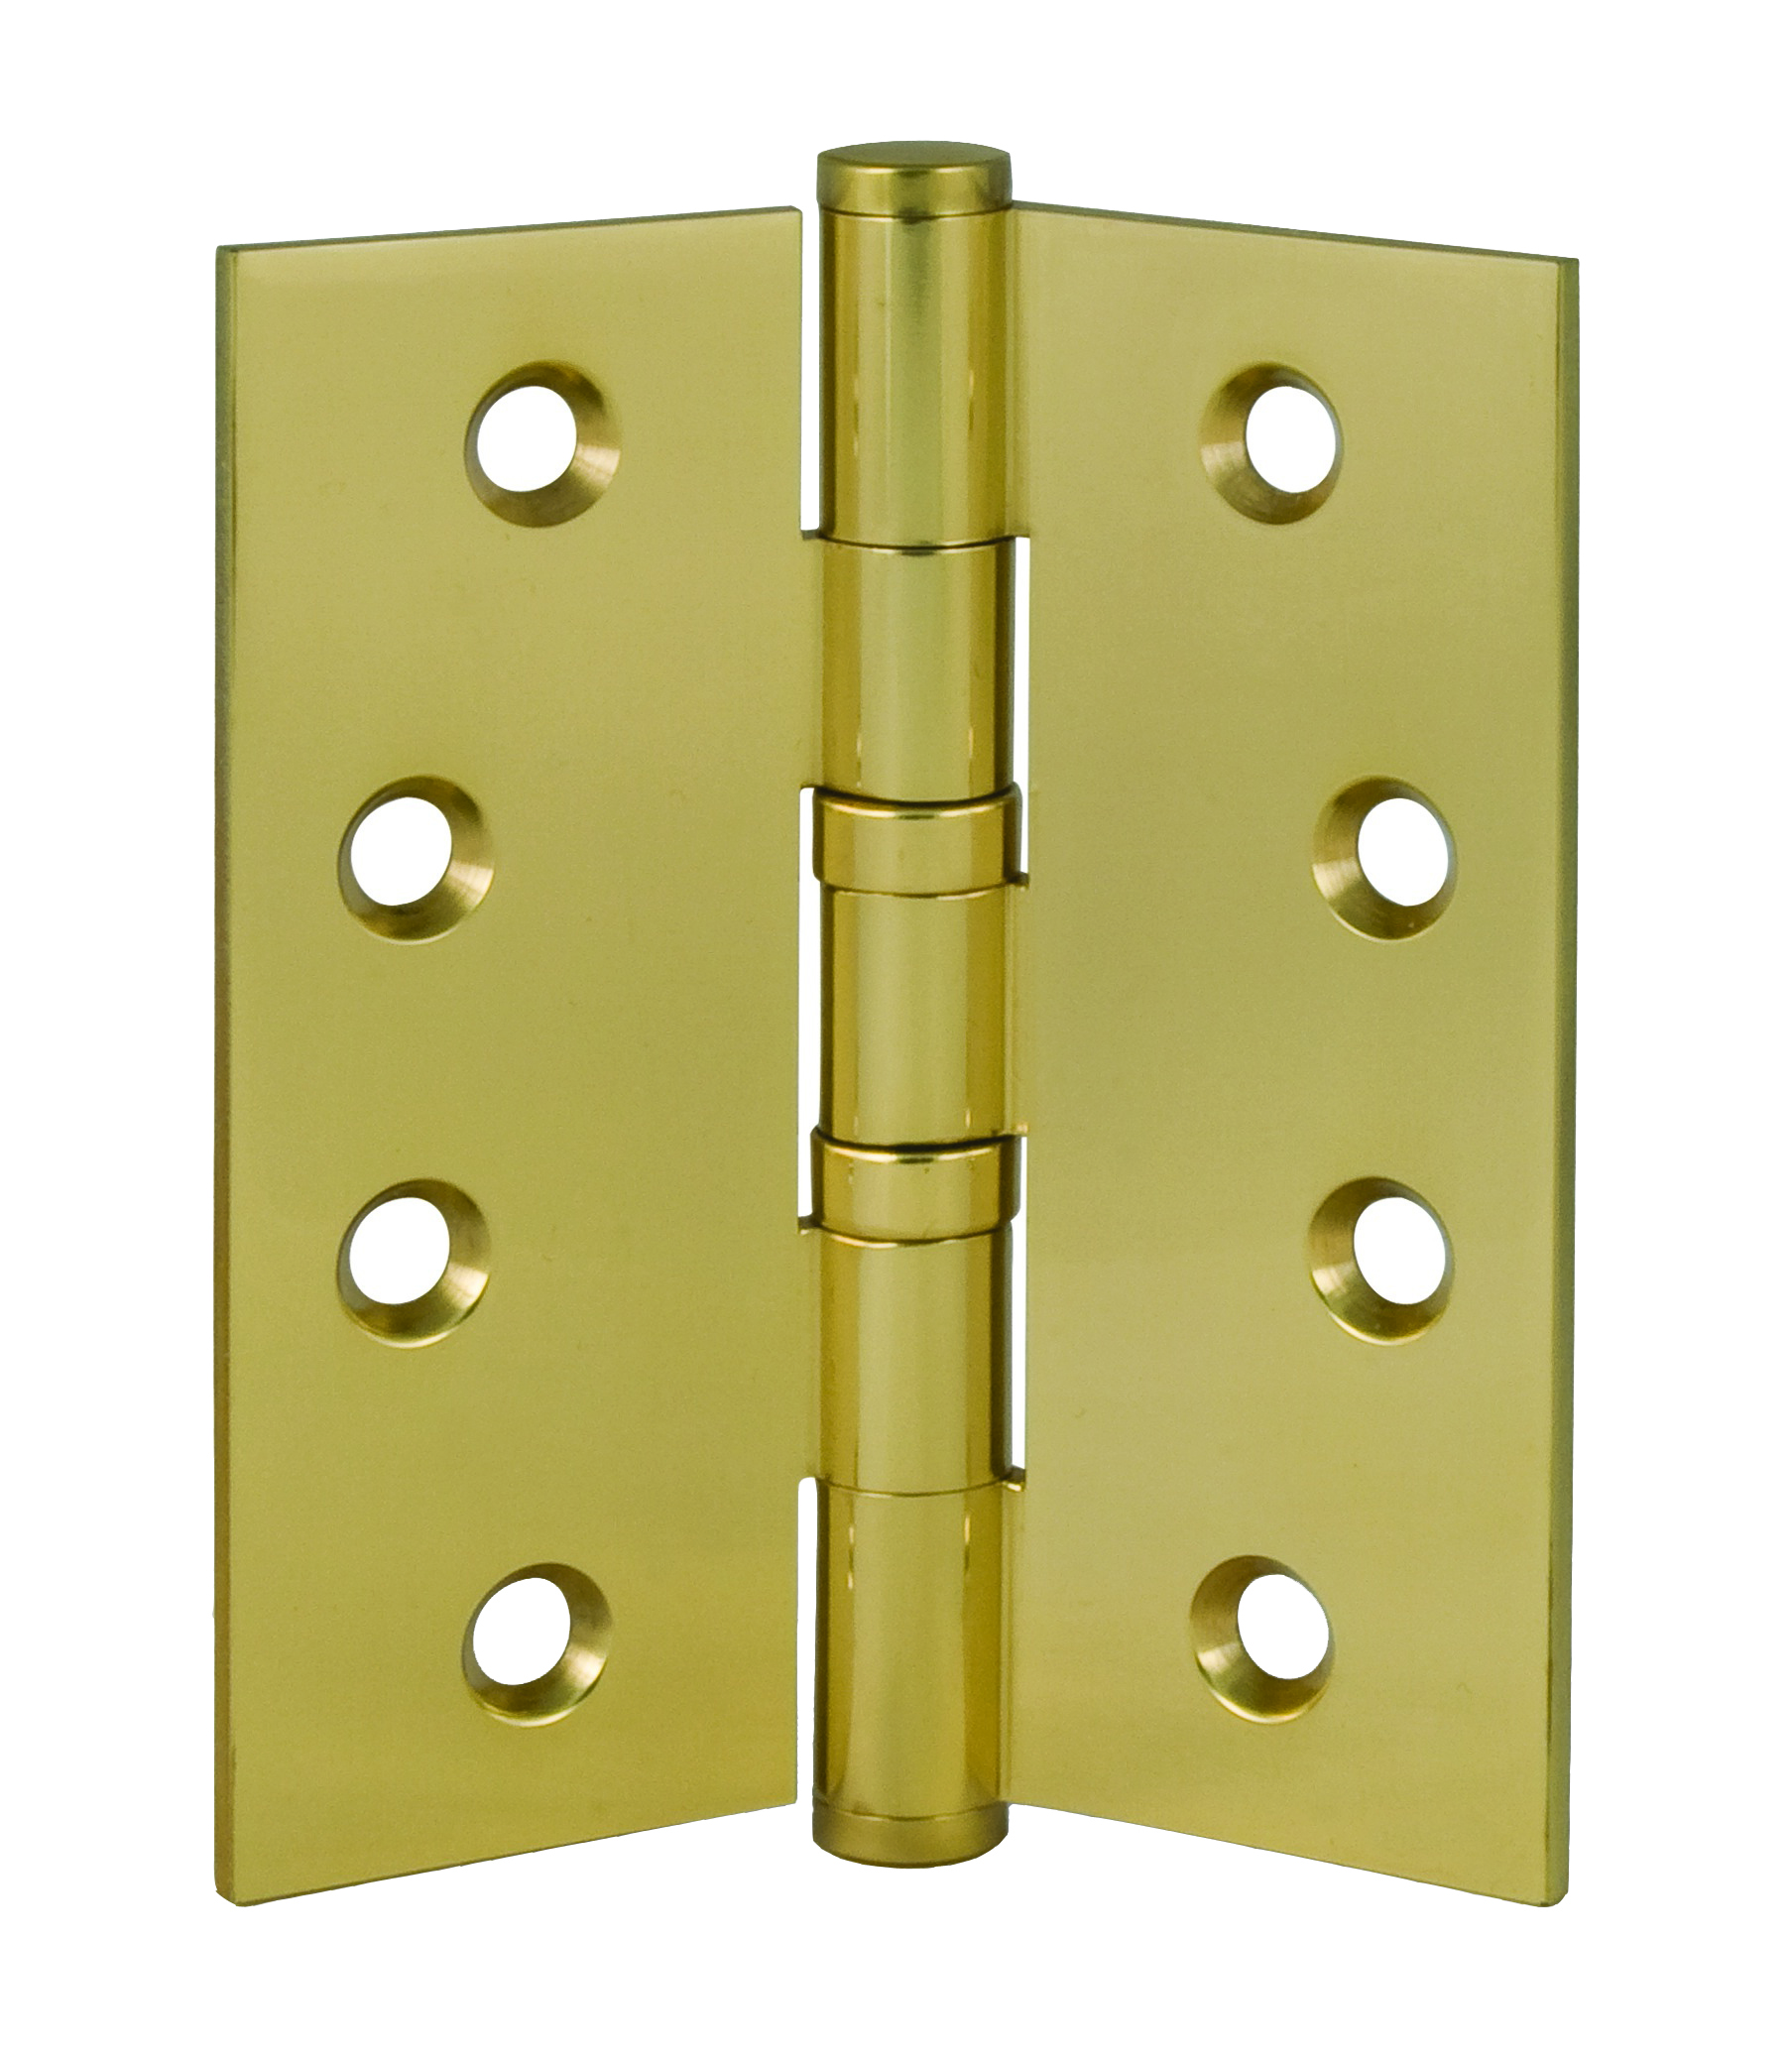 4″ Square Solid Brass Hinge